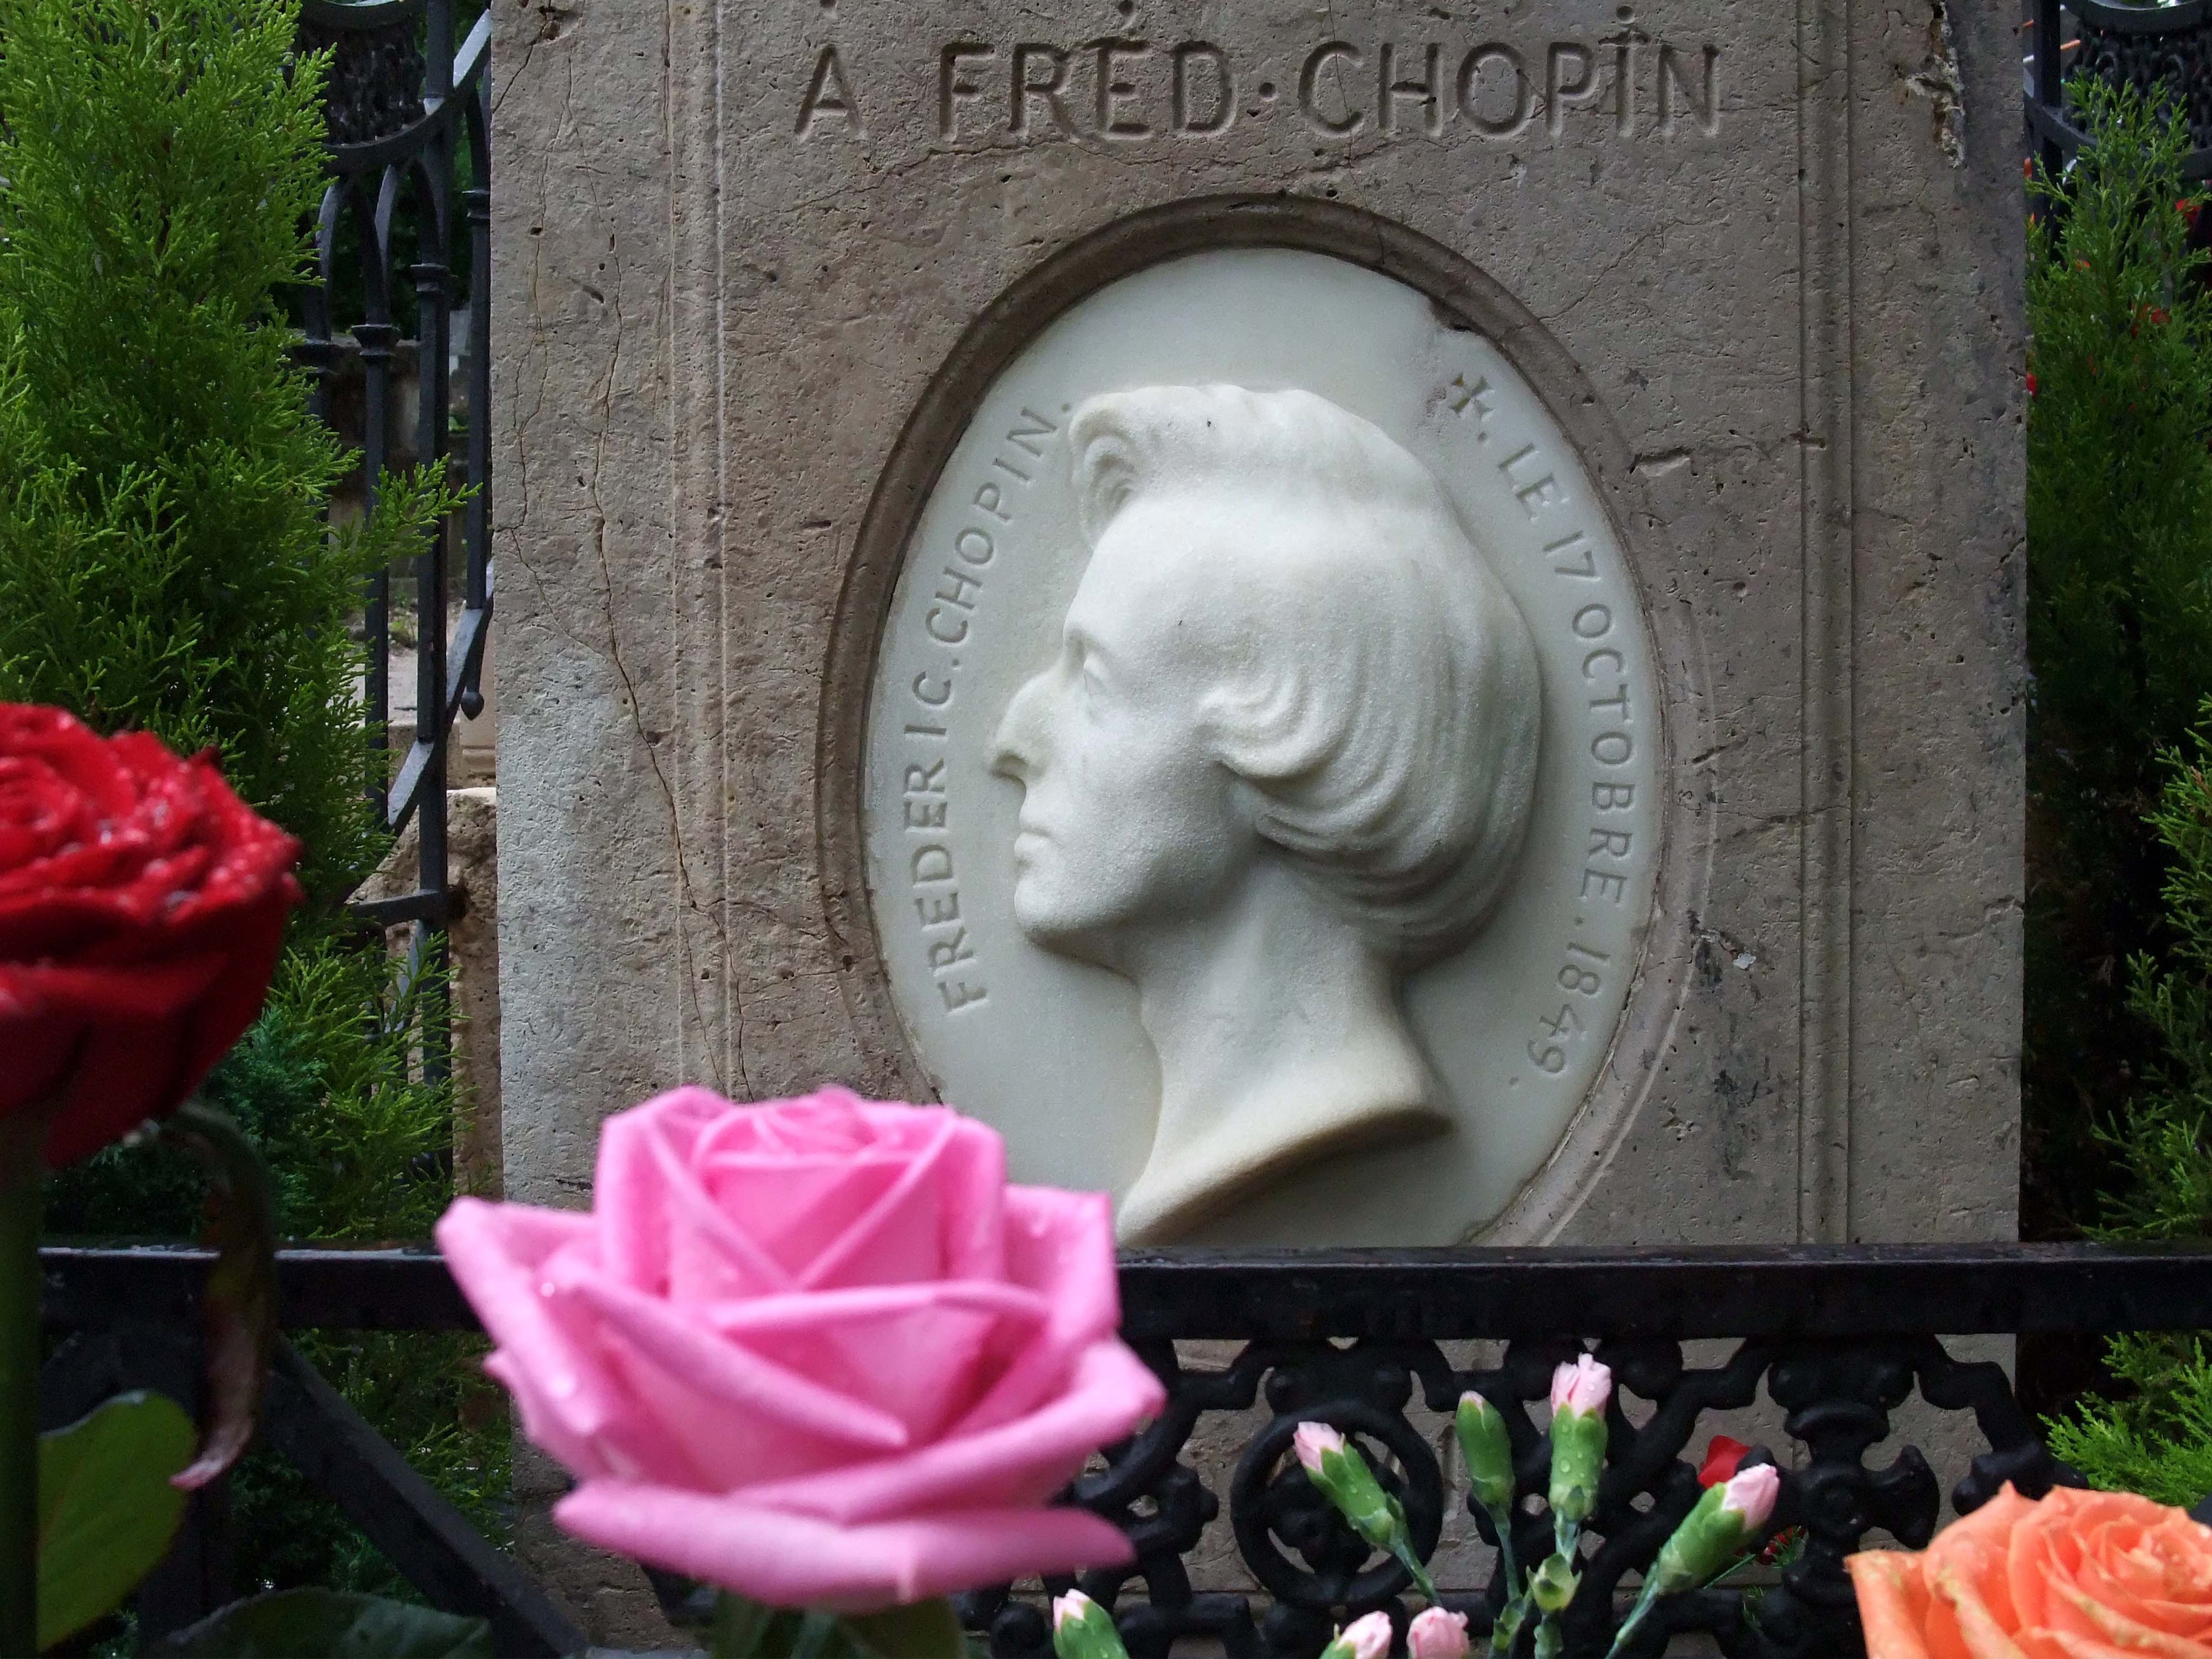 a fred chopin tombstone